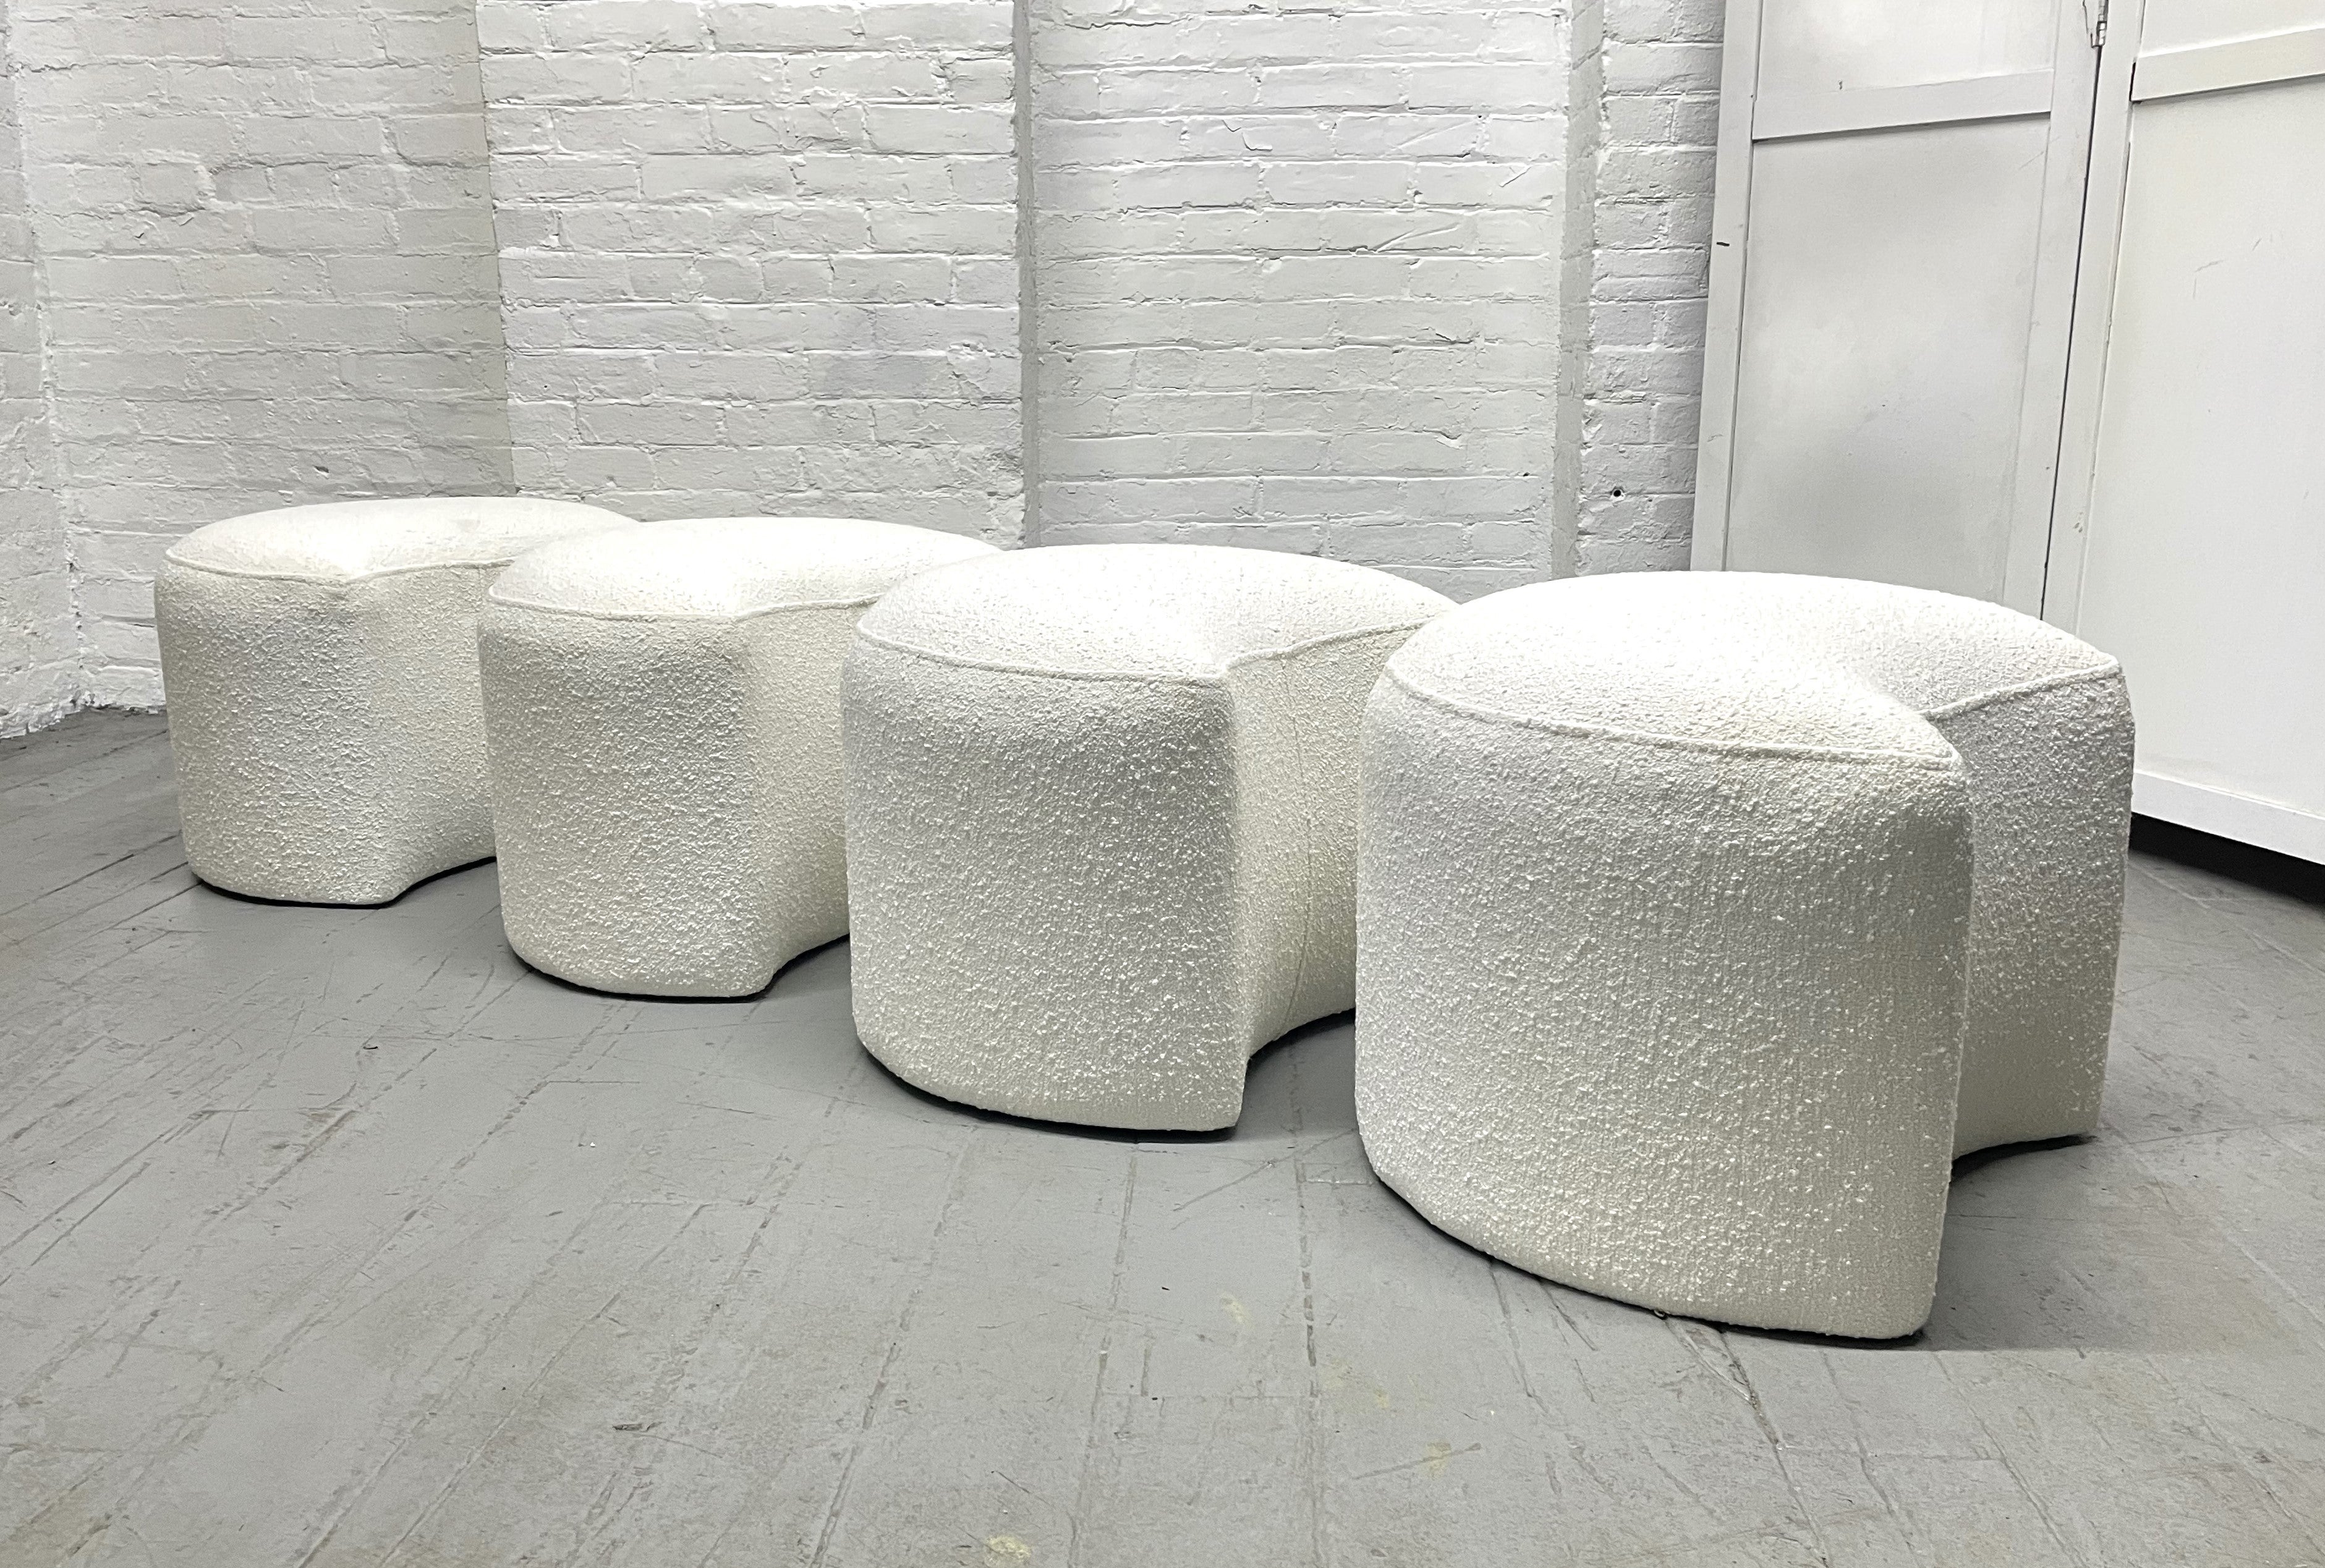 1960s set of 4 nesting stools upholstered in Boucle. The stools can be used in the nesting position or separately.
Each stool measures: 15 H x 20 W x 17 D.